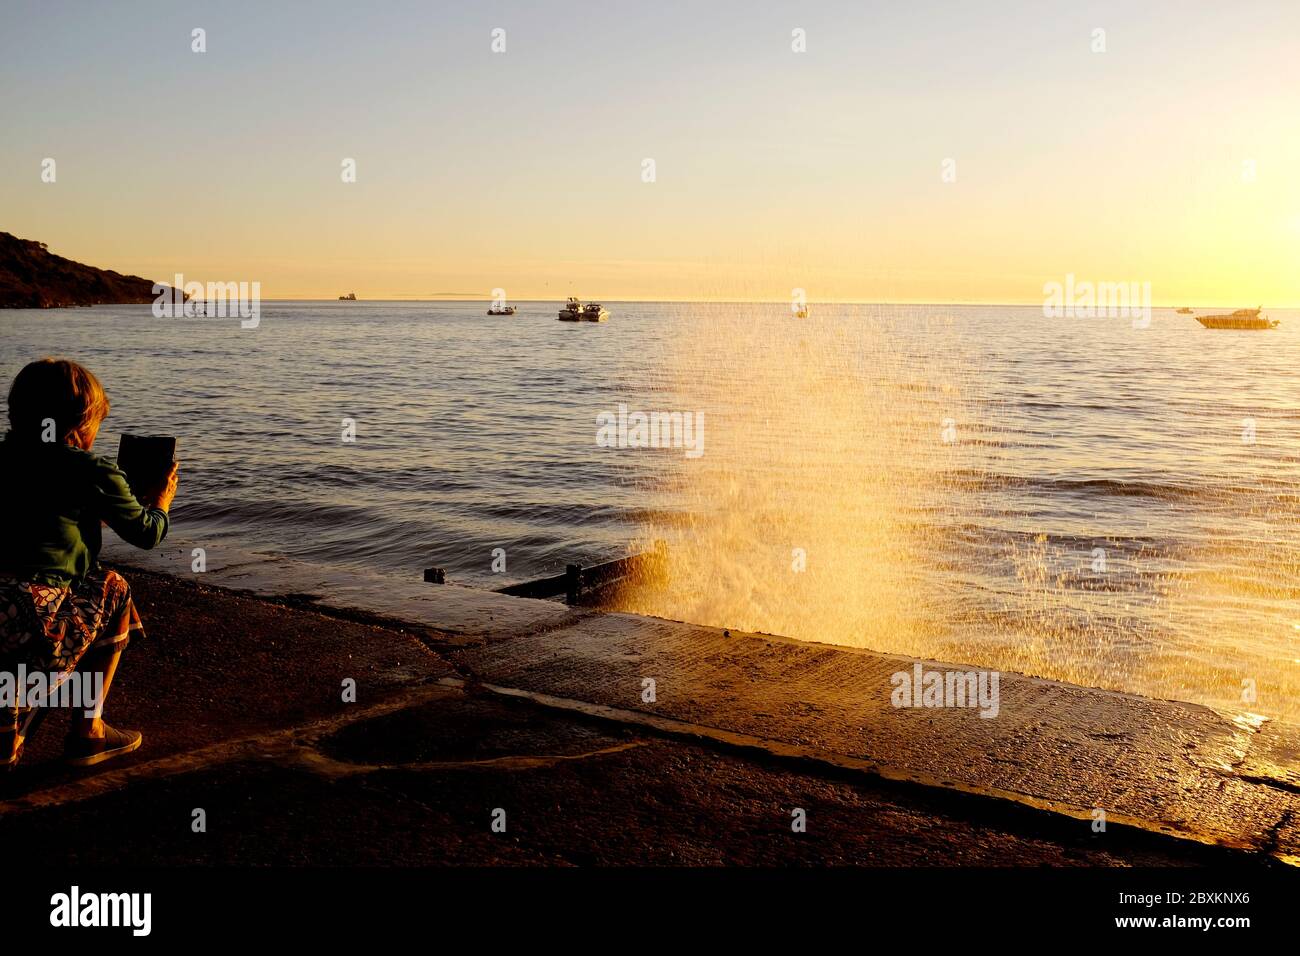 Woman taking a photo using her mobile phone of a wave crashing onto the sea wall revetment and sunset sunlight shining through the spray orange glow Stock Photo